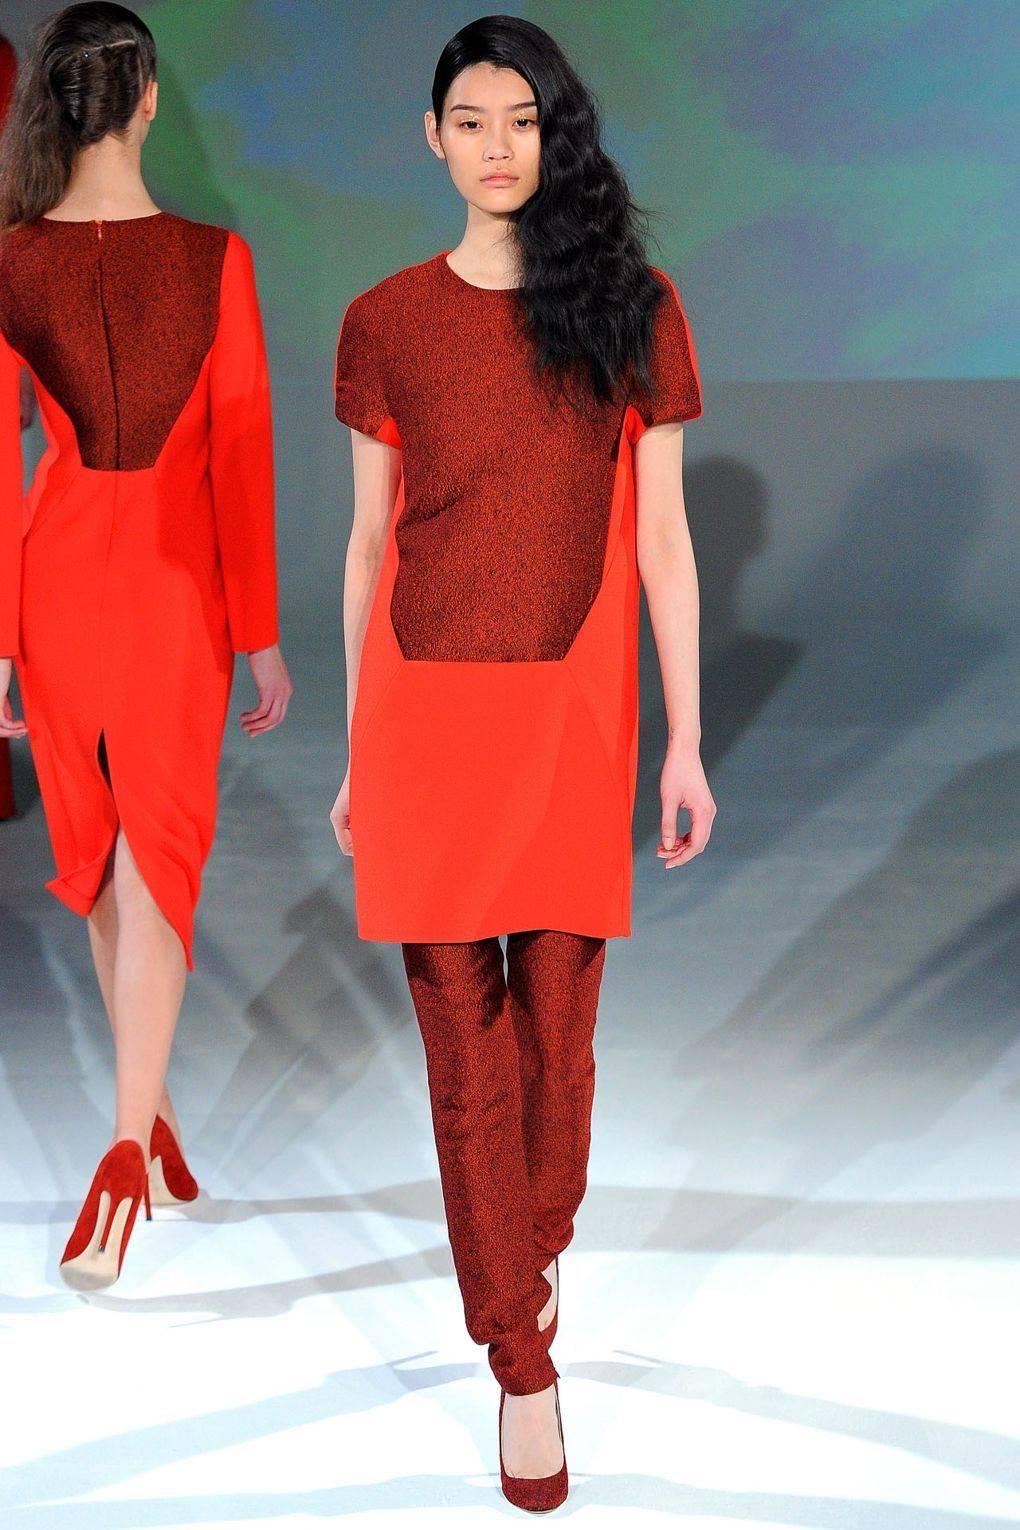 Hussein Chalayan A/W 2012 Ready-To-Wear Catwalk Red Dress I 38 uk 6 
Stunning and unique dress from Chalayan featuring metallic boucle textured fabric to the bodice 
Shift style dress, concealed pockets to each side 
%91 polyamide 9% Acrylic
Length